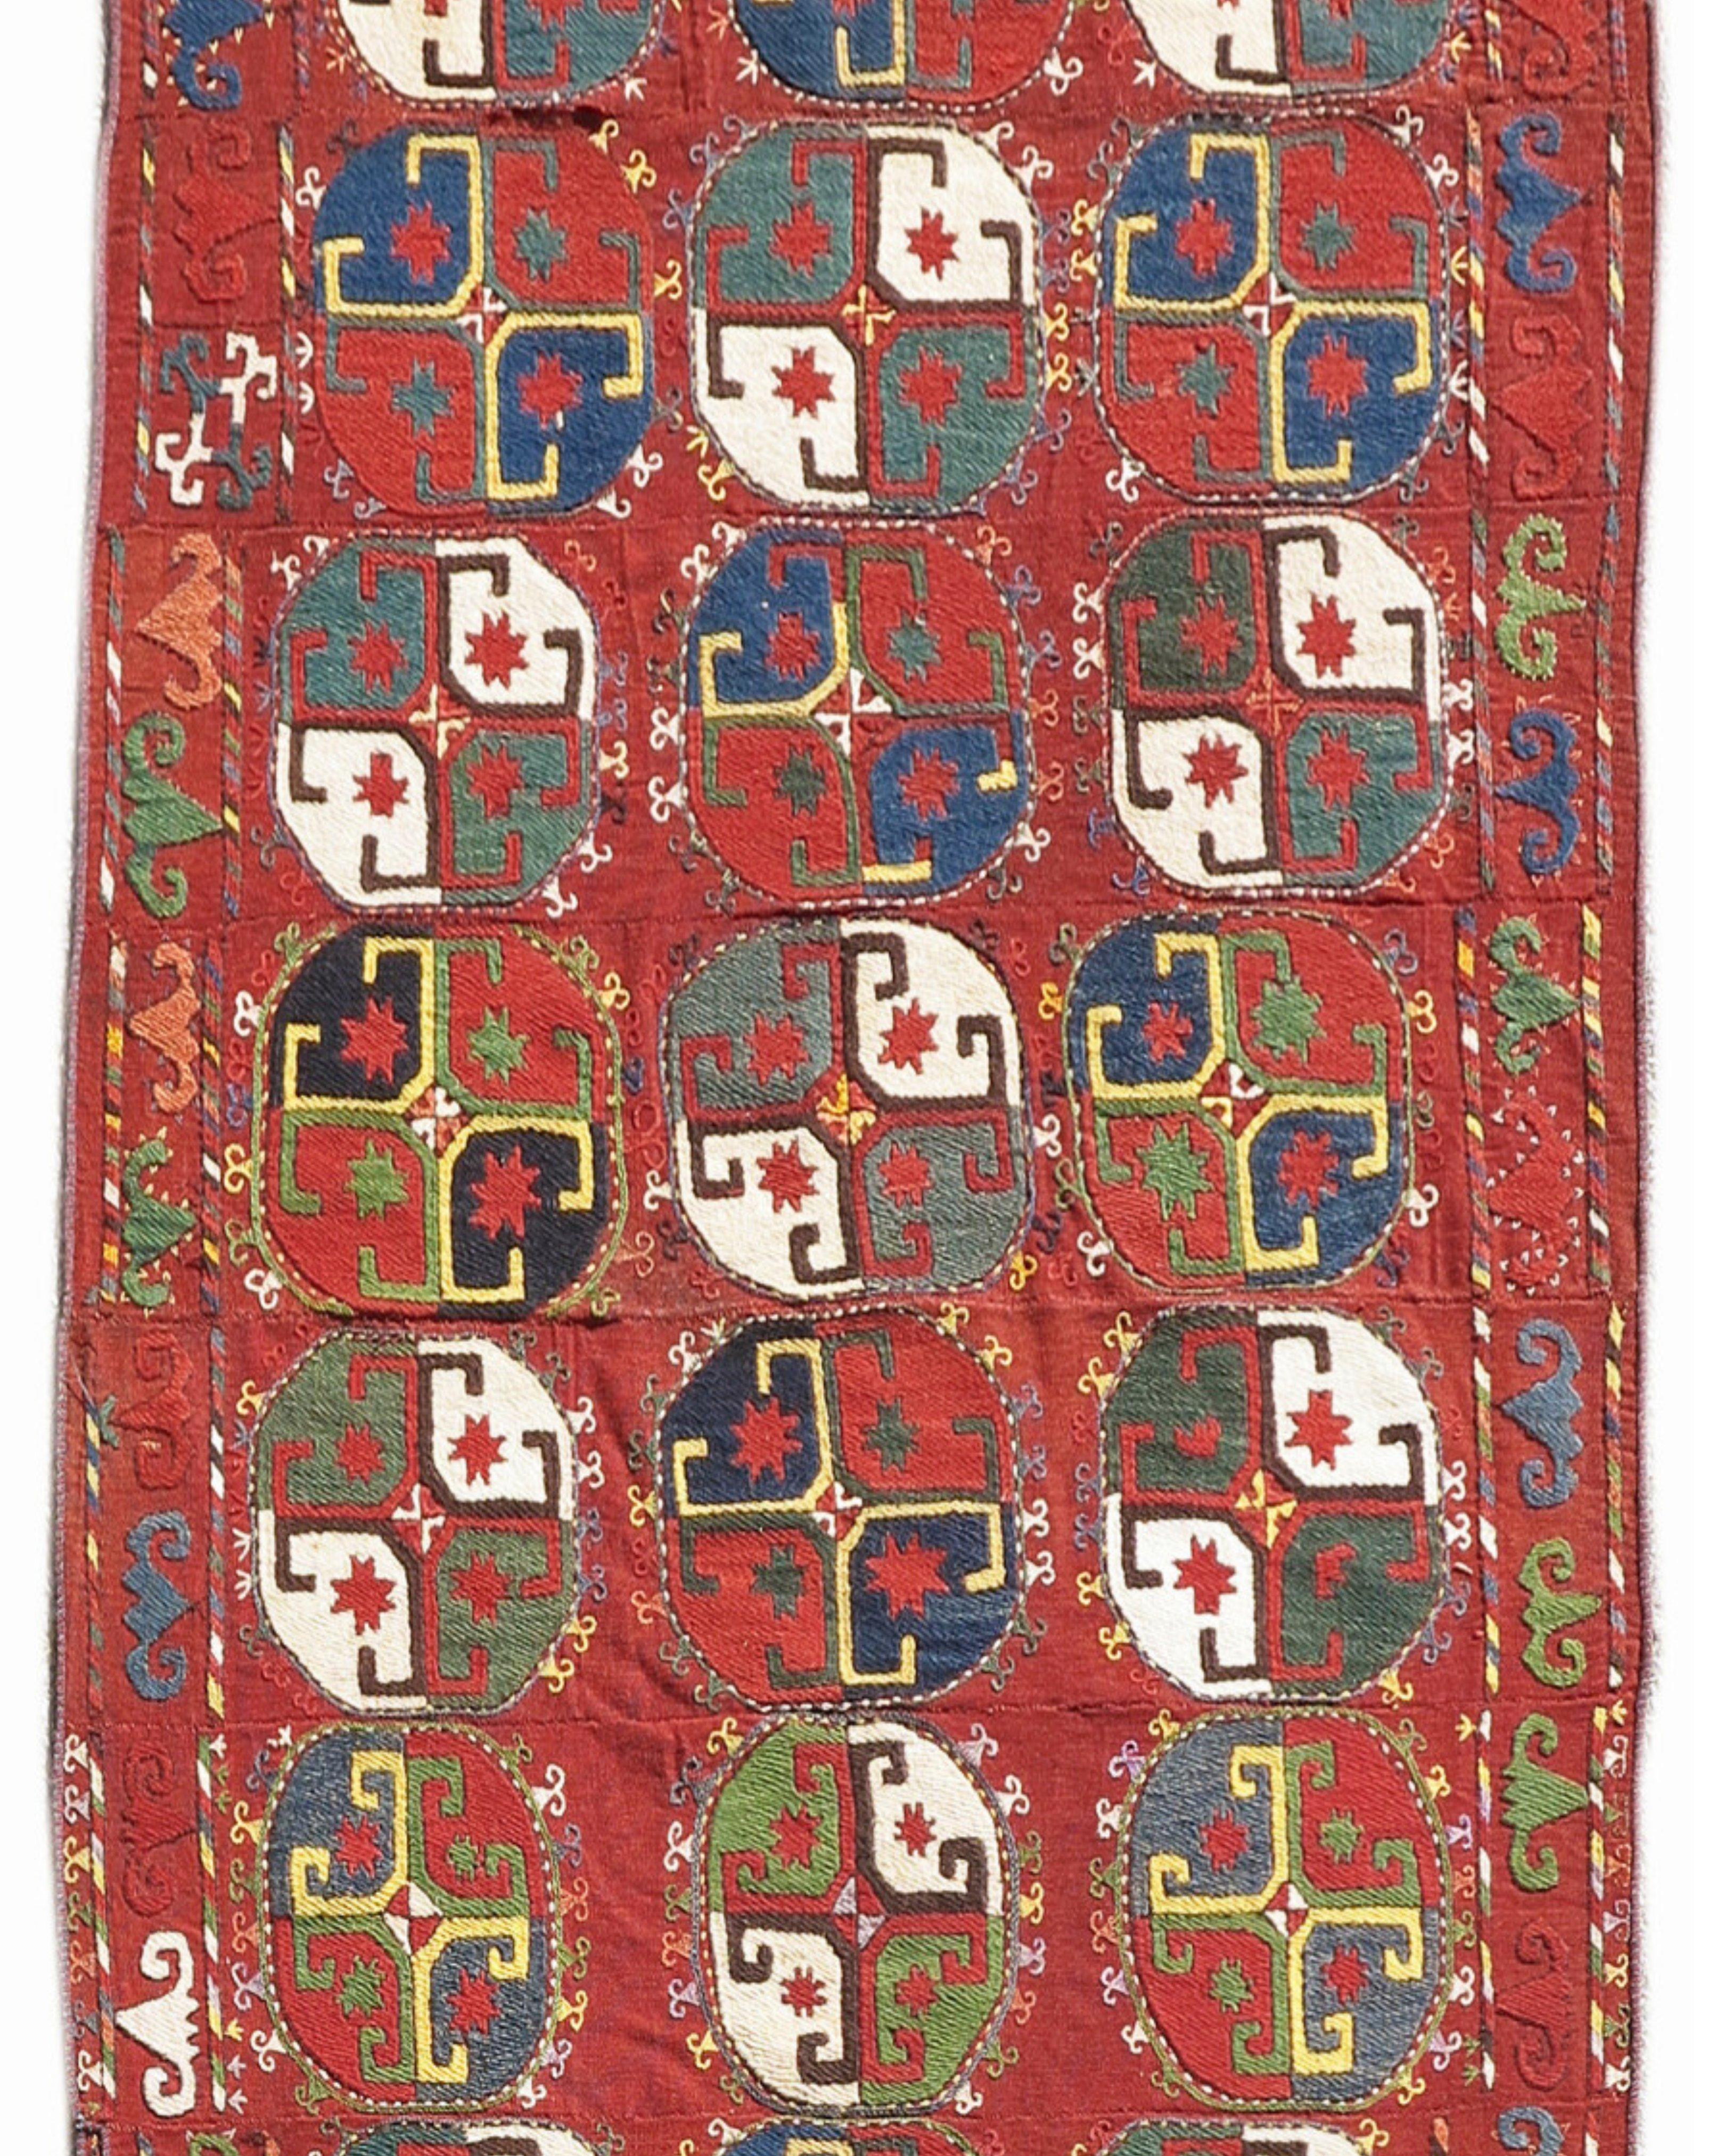 Hand-Woven Antique Uzbek Mixed Technique Flatwoven Rug, Early 20th Century For Sale